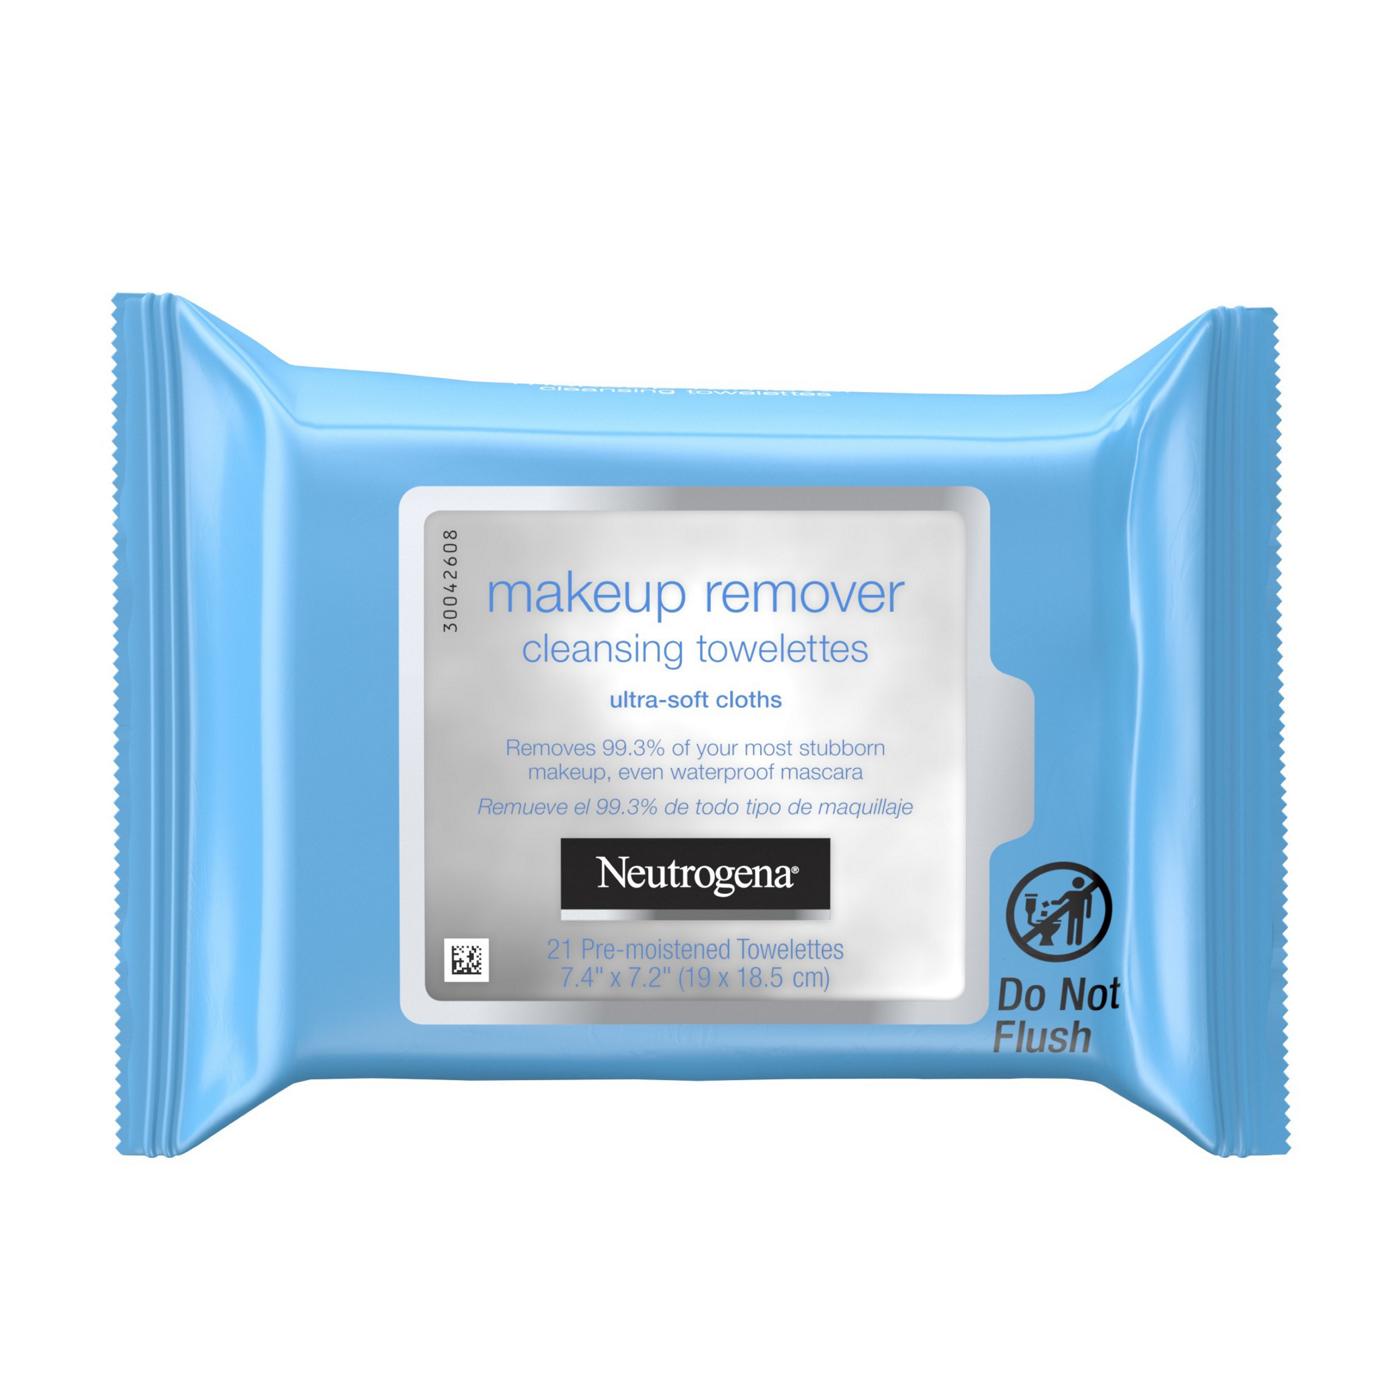 Neutrogena Makeup Remover Cleansing Towelettes; image 1 of 5